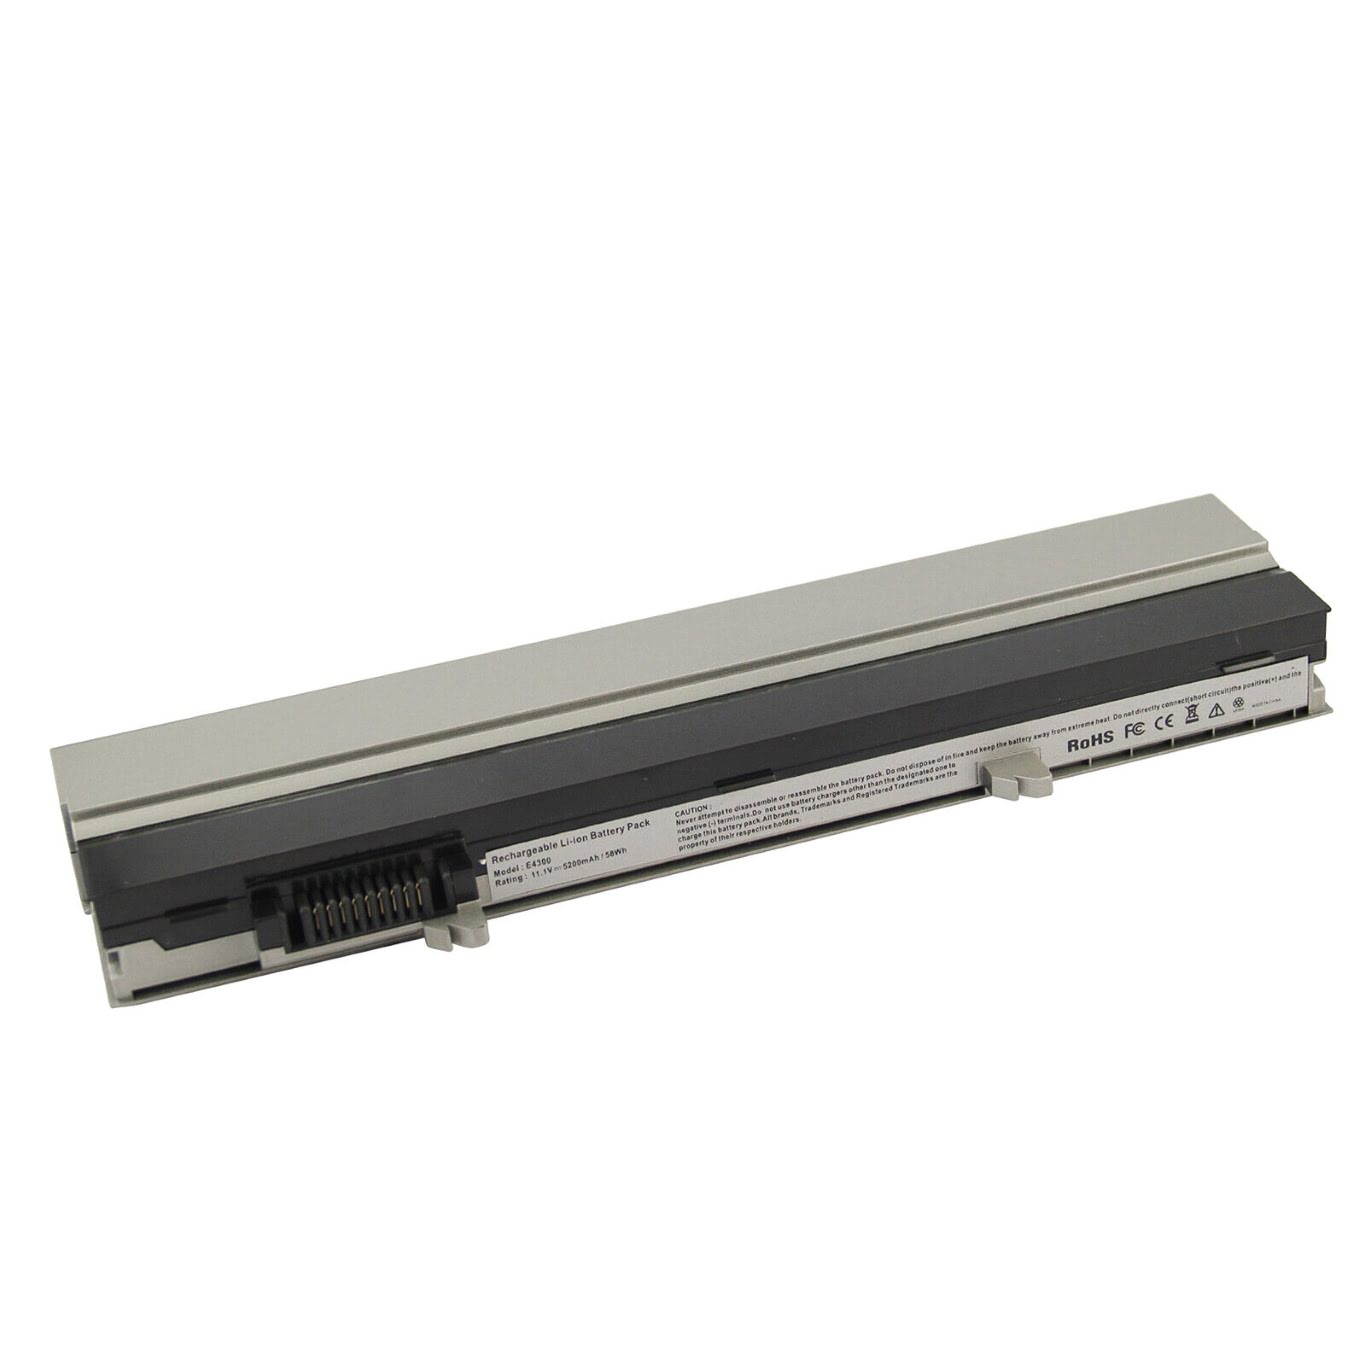 312-0822, 312-0823 replacement Laptop Battery for Dell Latitude E4300, Latitude E4300N, 11.1 V, 6 cells, 5200mah/58wh